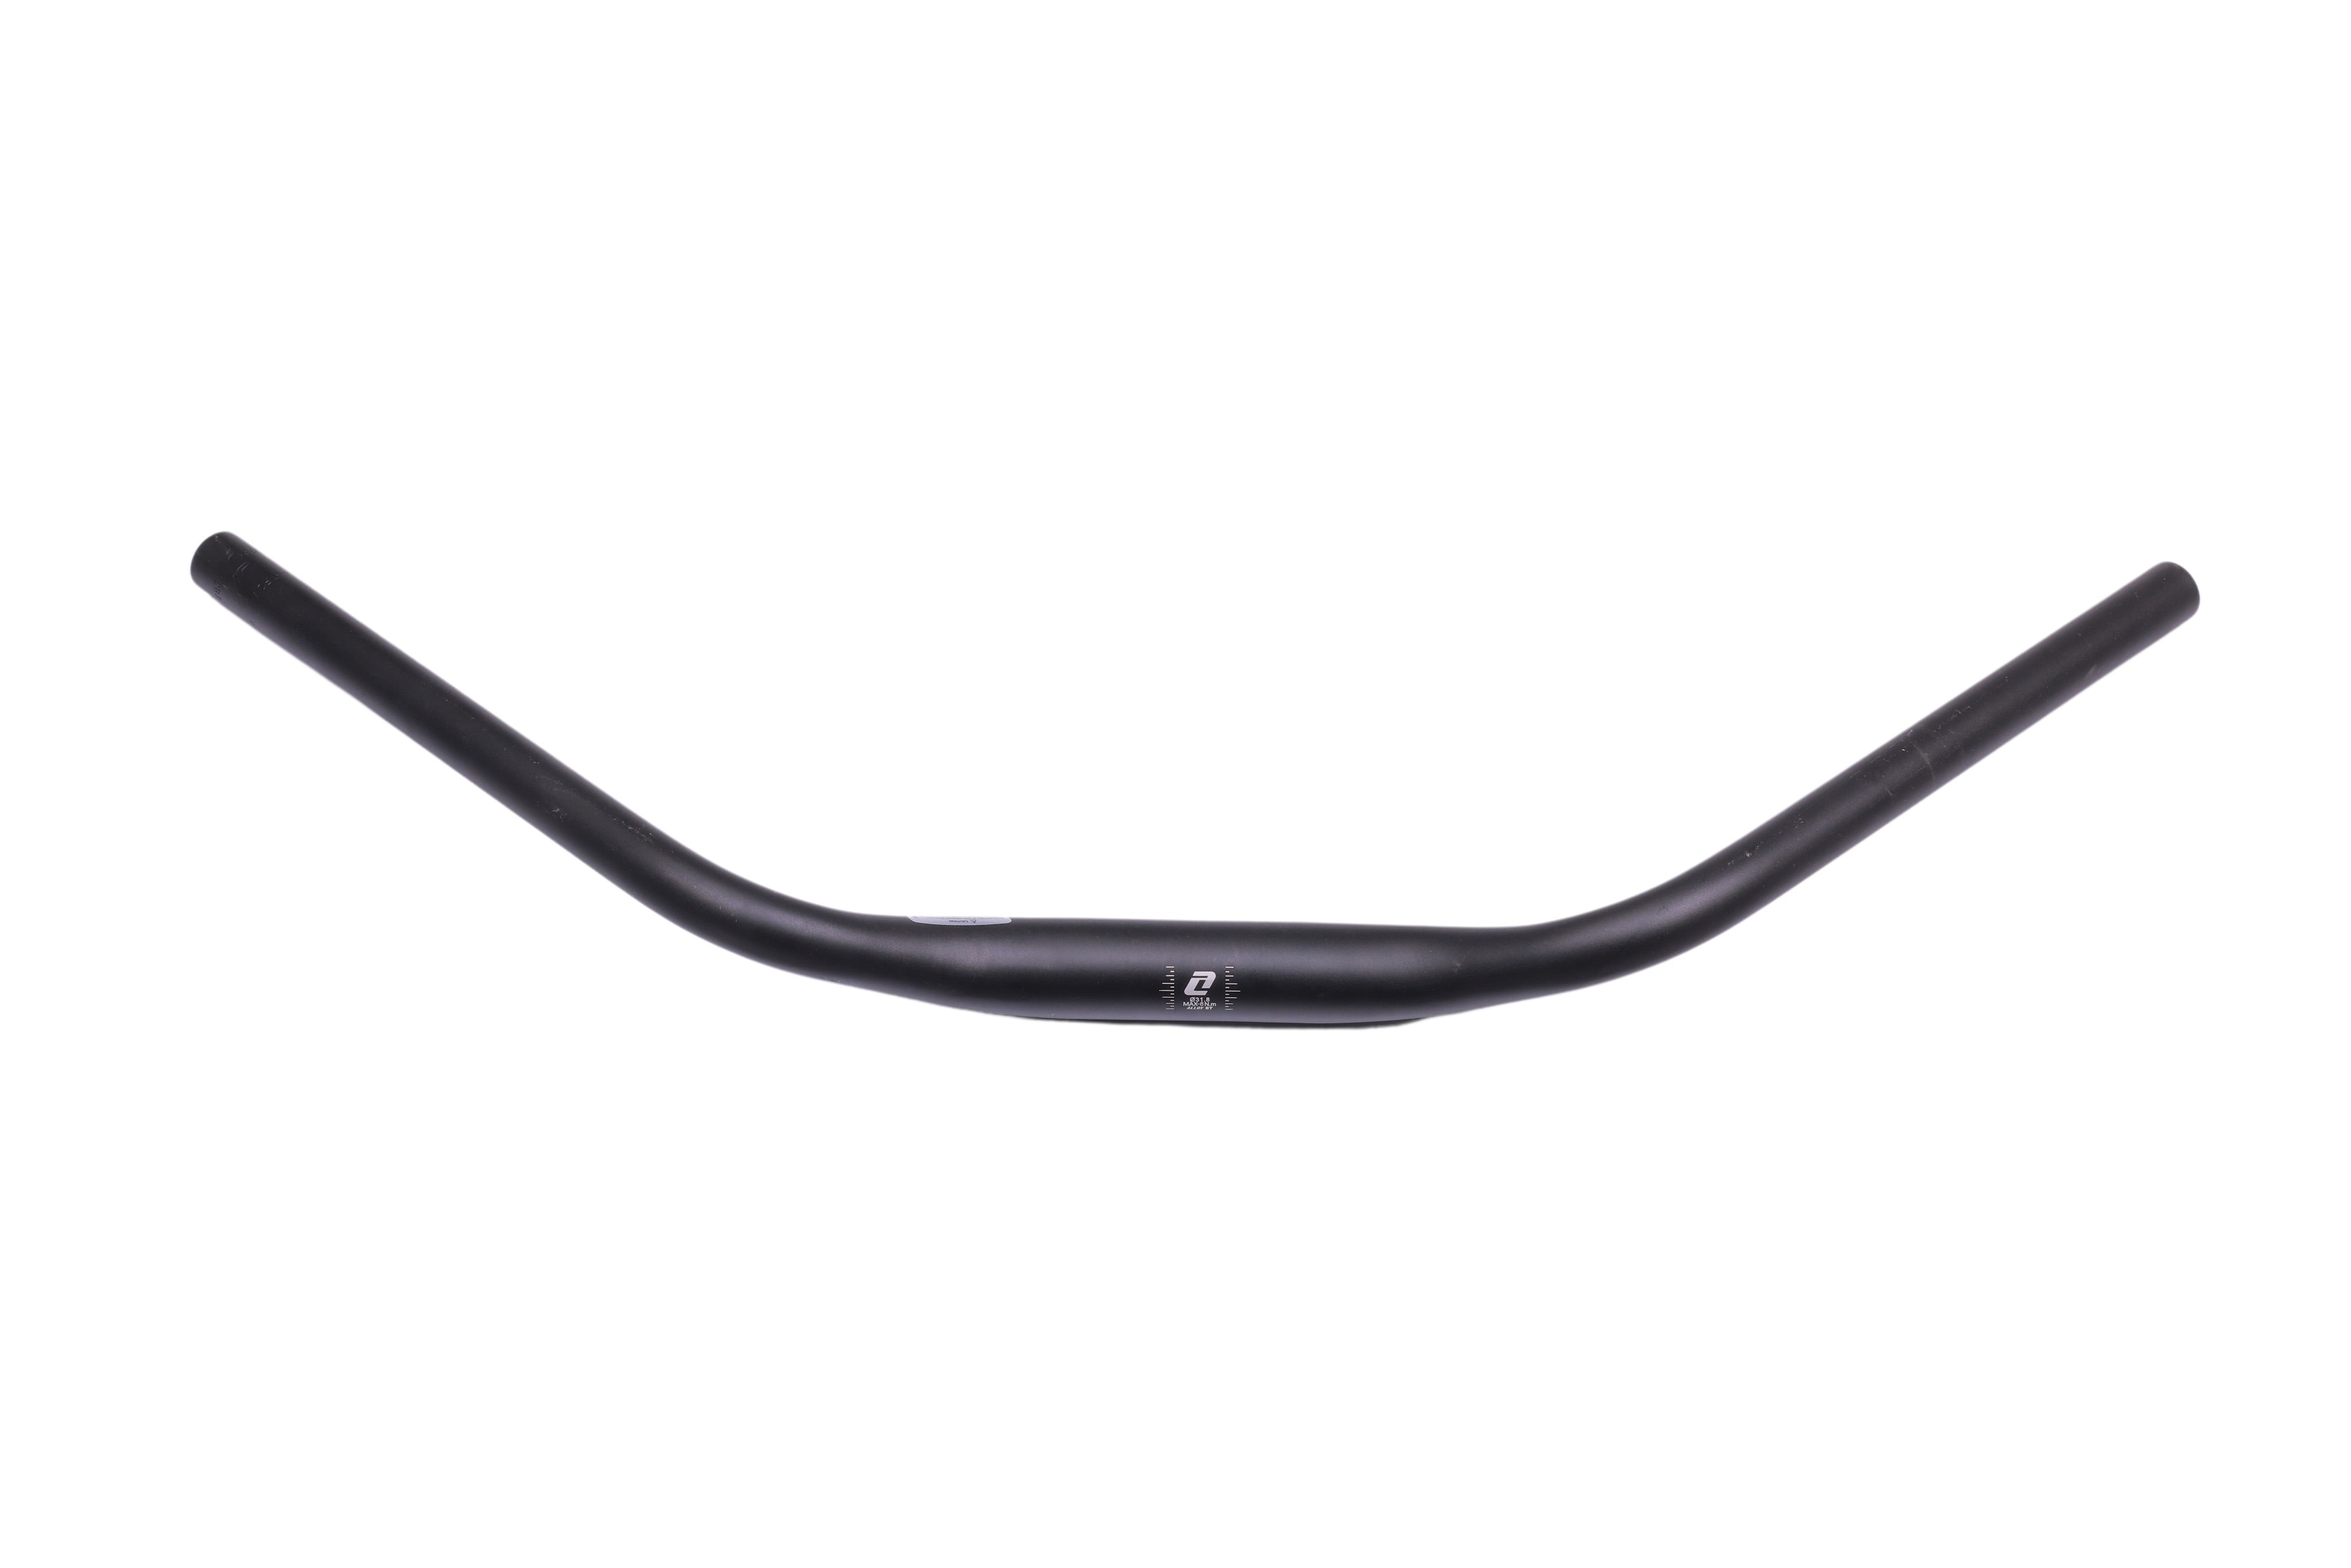 Handlebar by Zoom 1.5" rise- used on Denago City and Commute